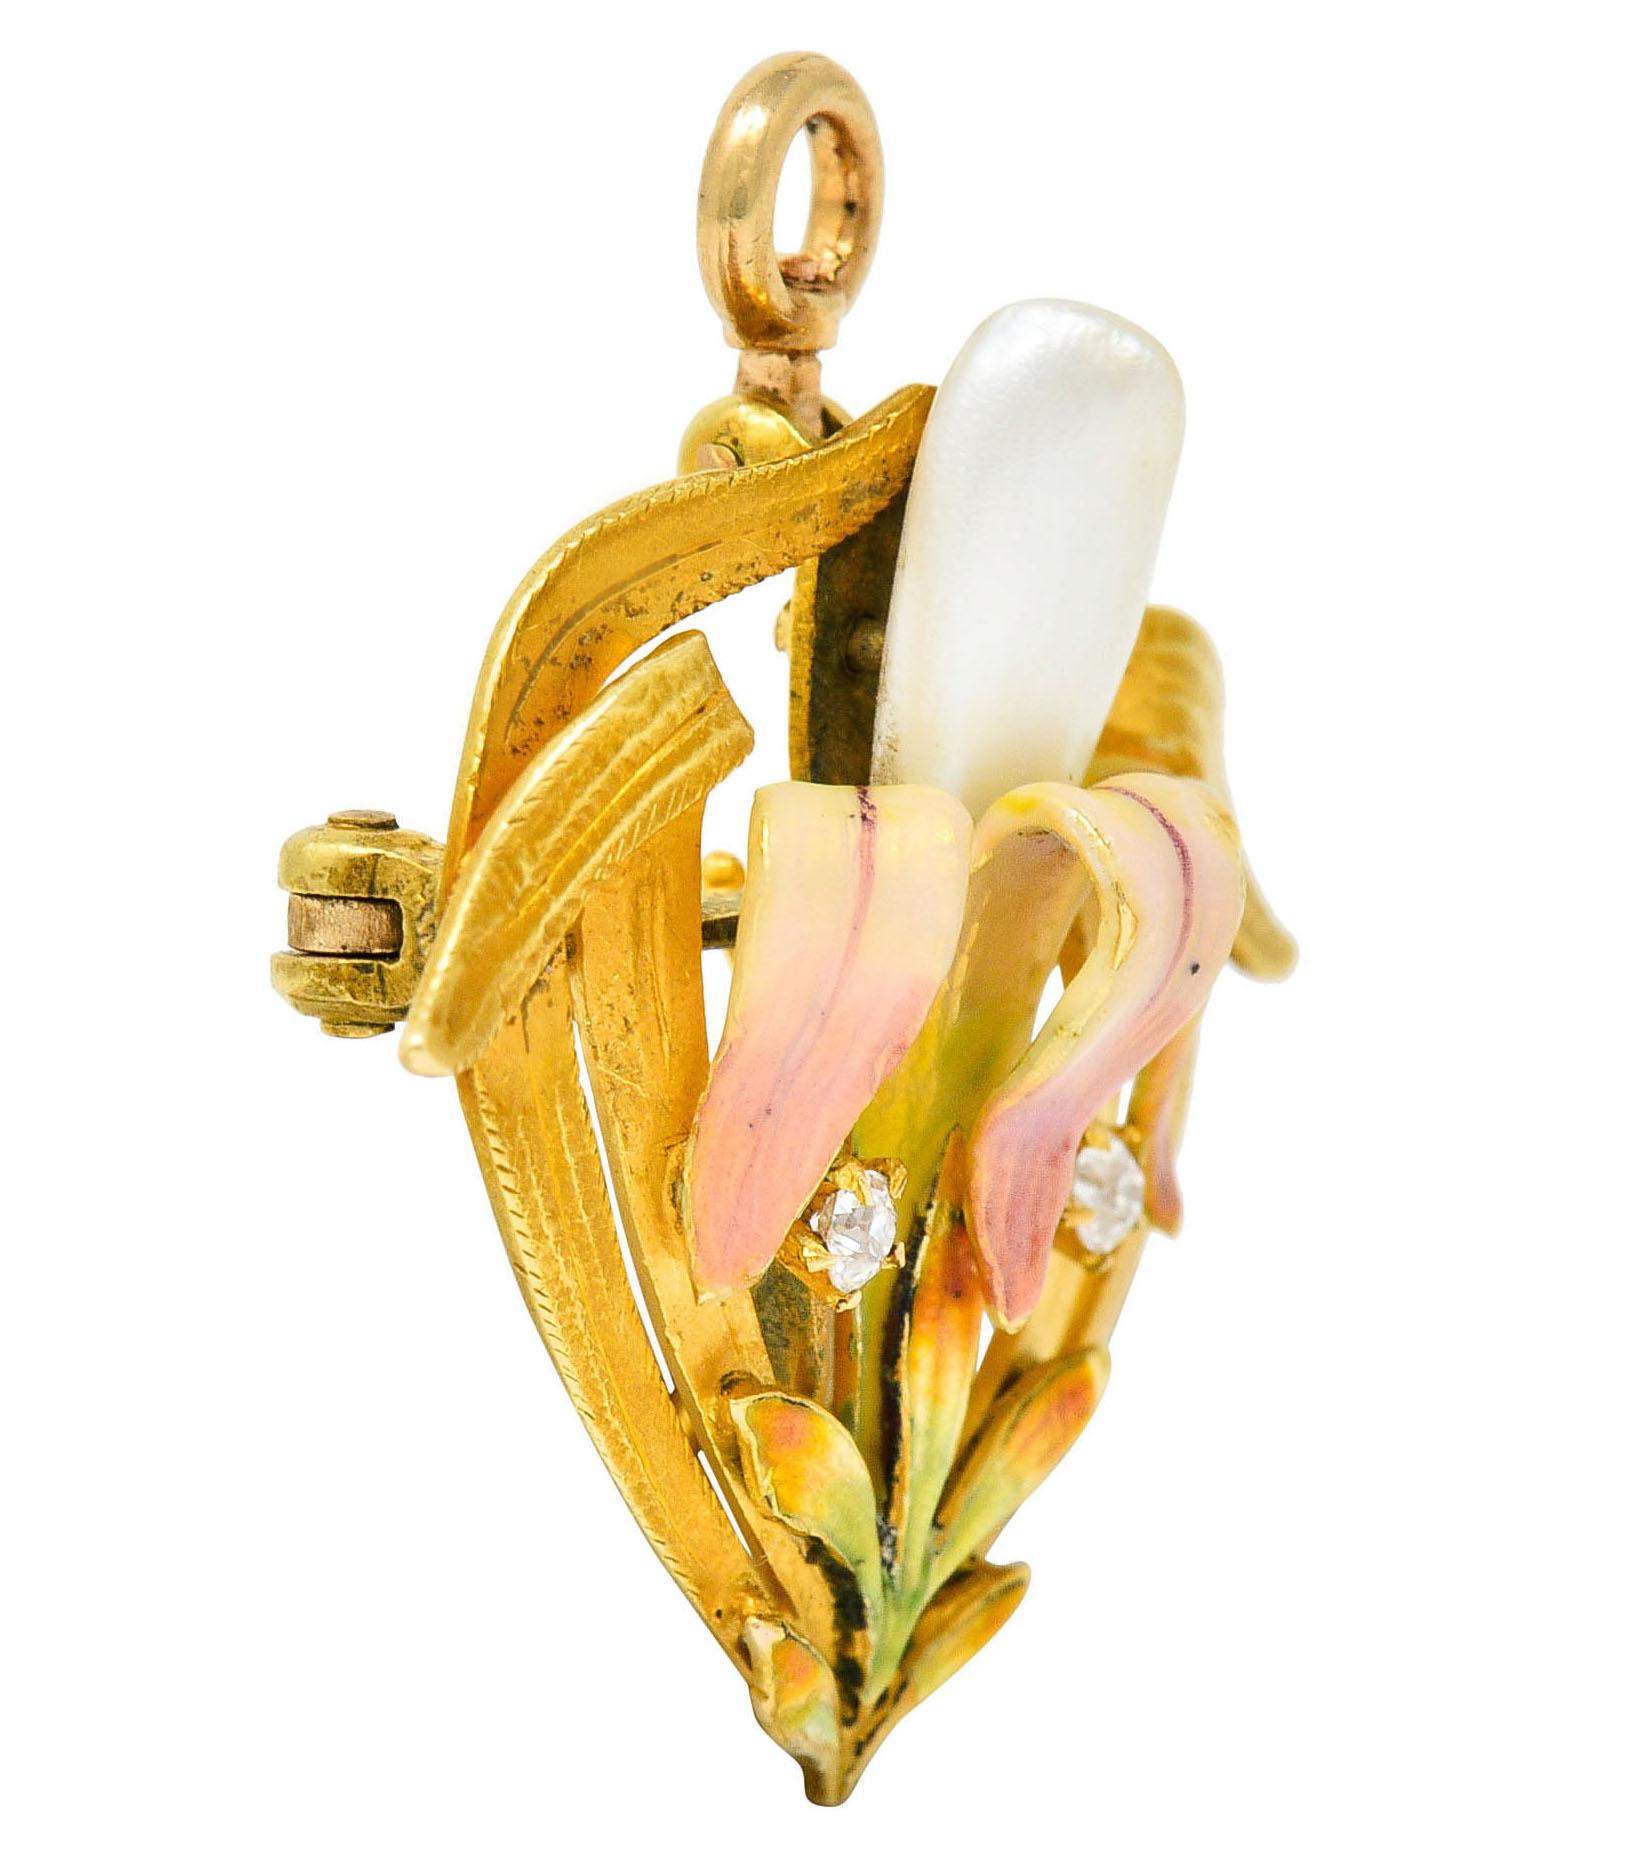 Brooch is designed as a stylized water lily flower surrounded by gold foliate whiplash

Flower is glossed with ombre pink, orange, and green enamel - exhibiting some loss

Centering an elongated pearl - white in body color with very good